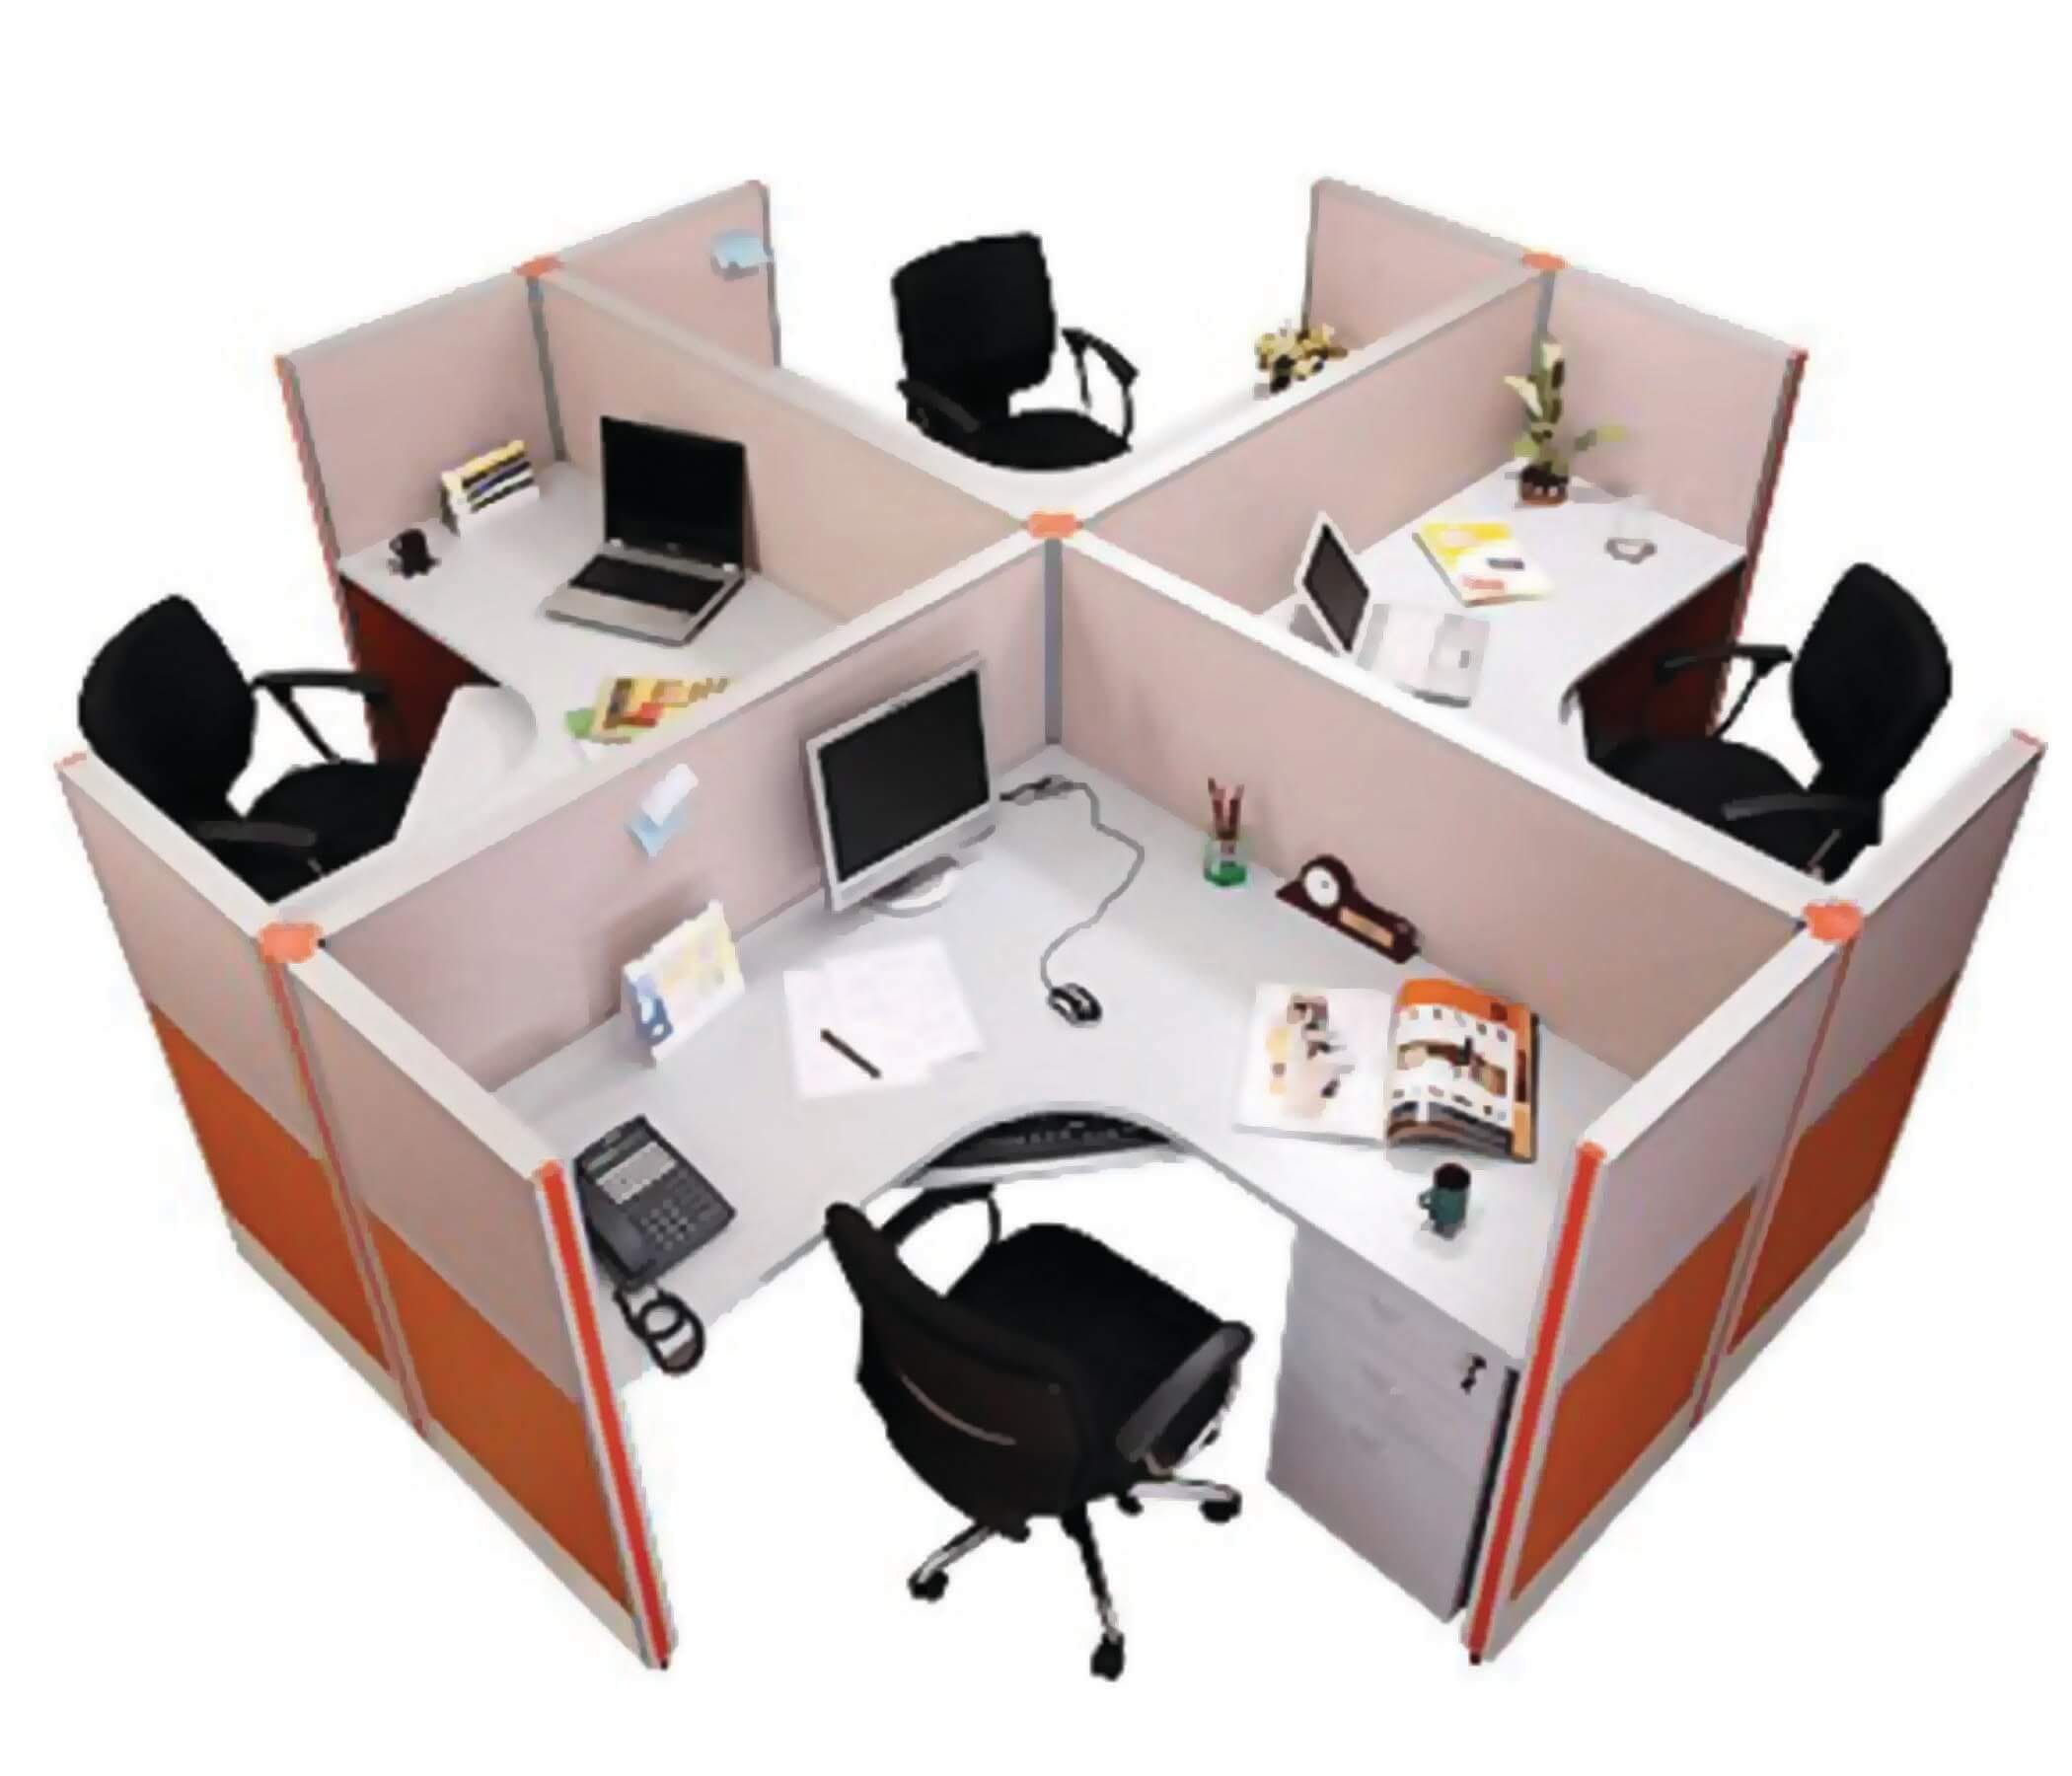 four-clear-office-table-design-with-natural-colors-3